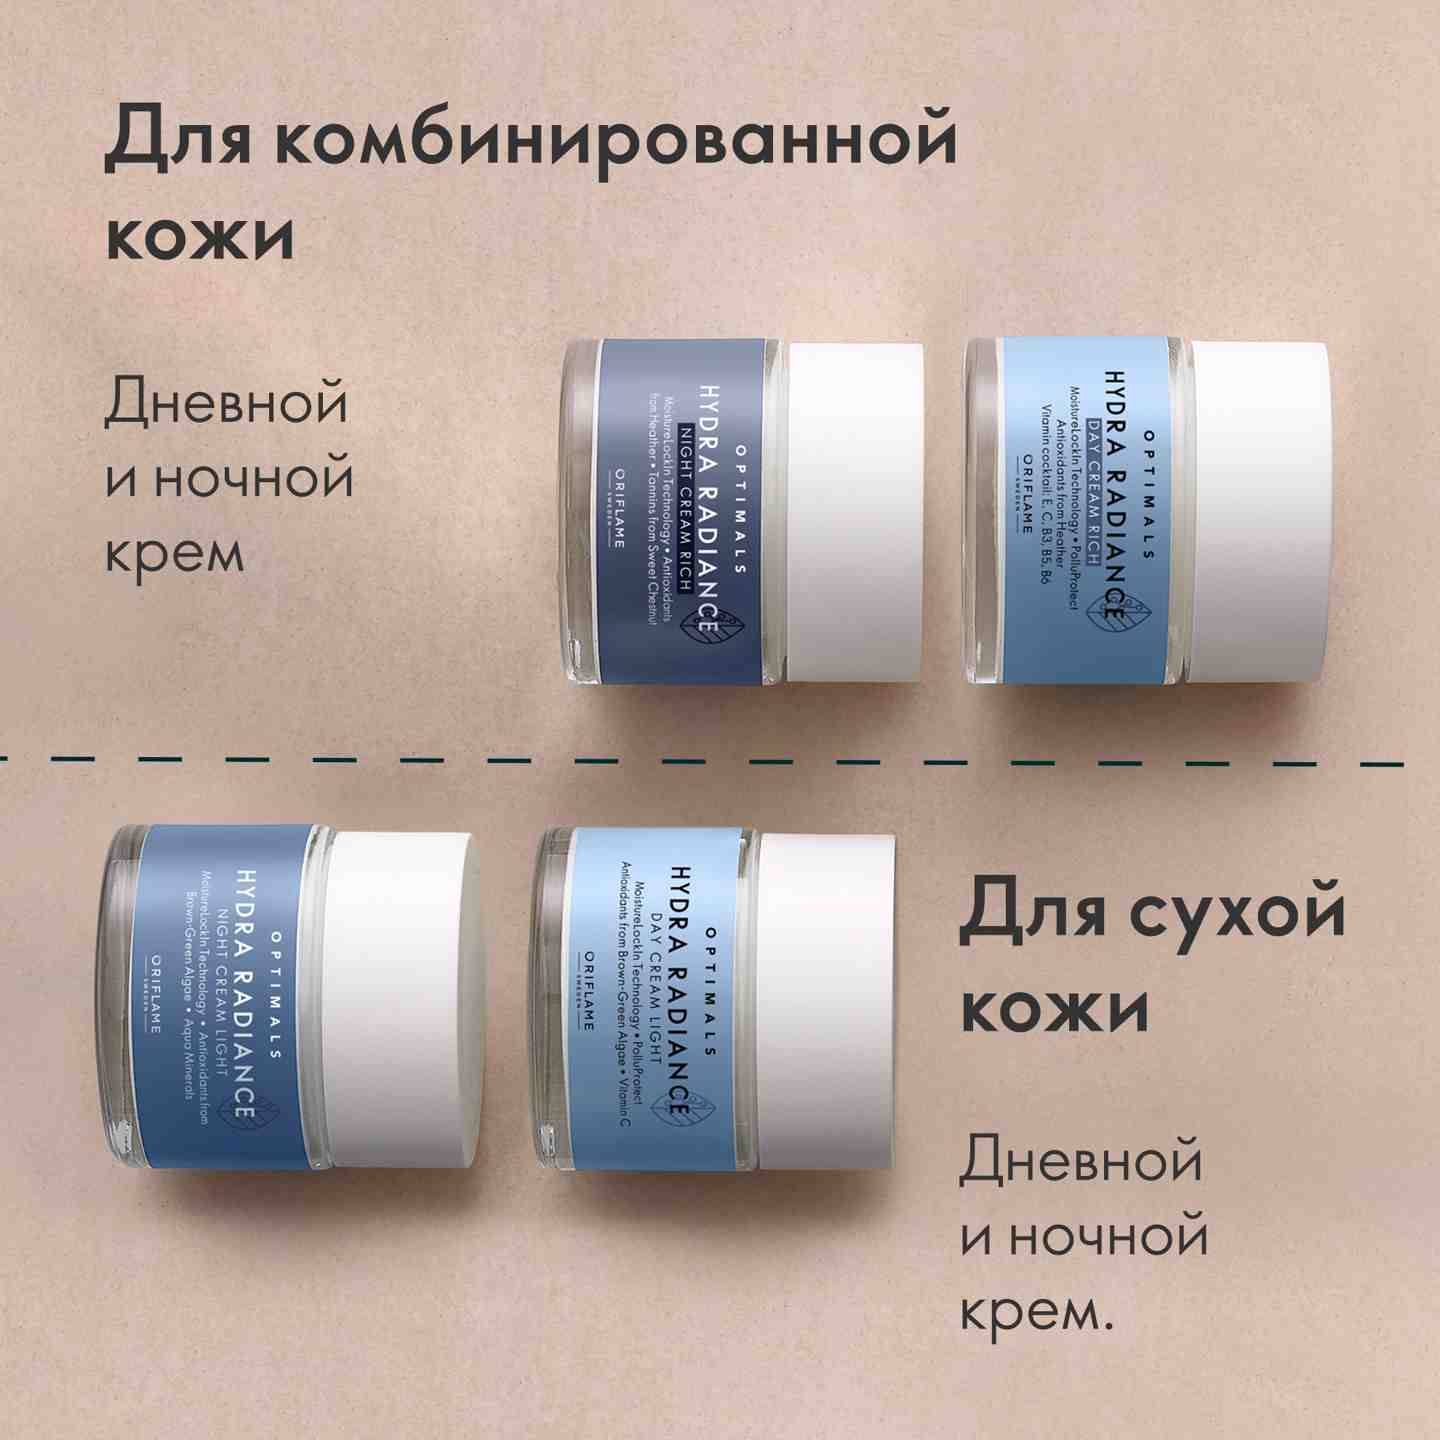 https://media-cdn.oriflame.com/productImage?externalMediaId=product-management-media%2fProducts%2f42588%2fGE%2f42588_4.png&id=15124780&version=1